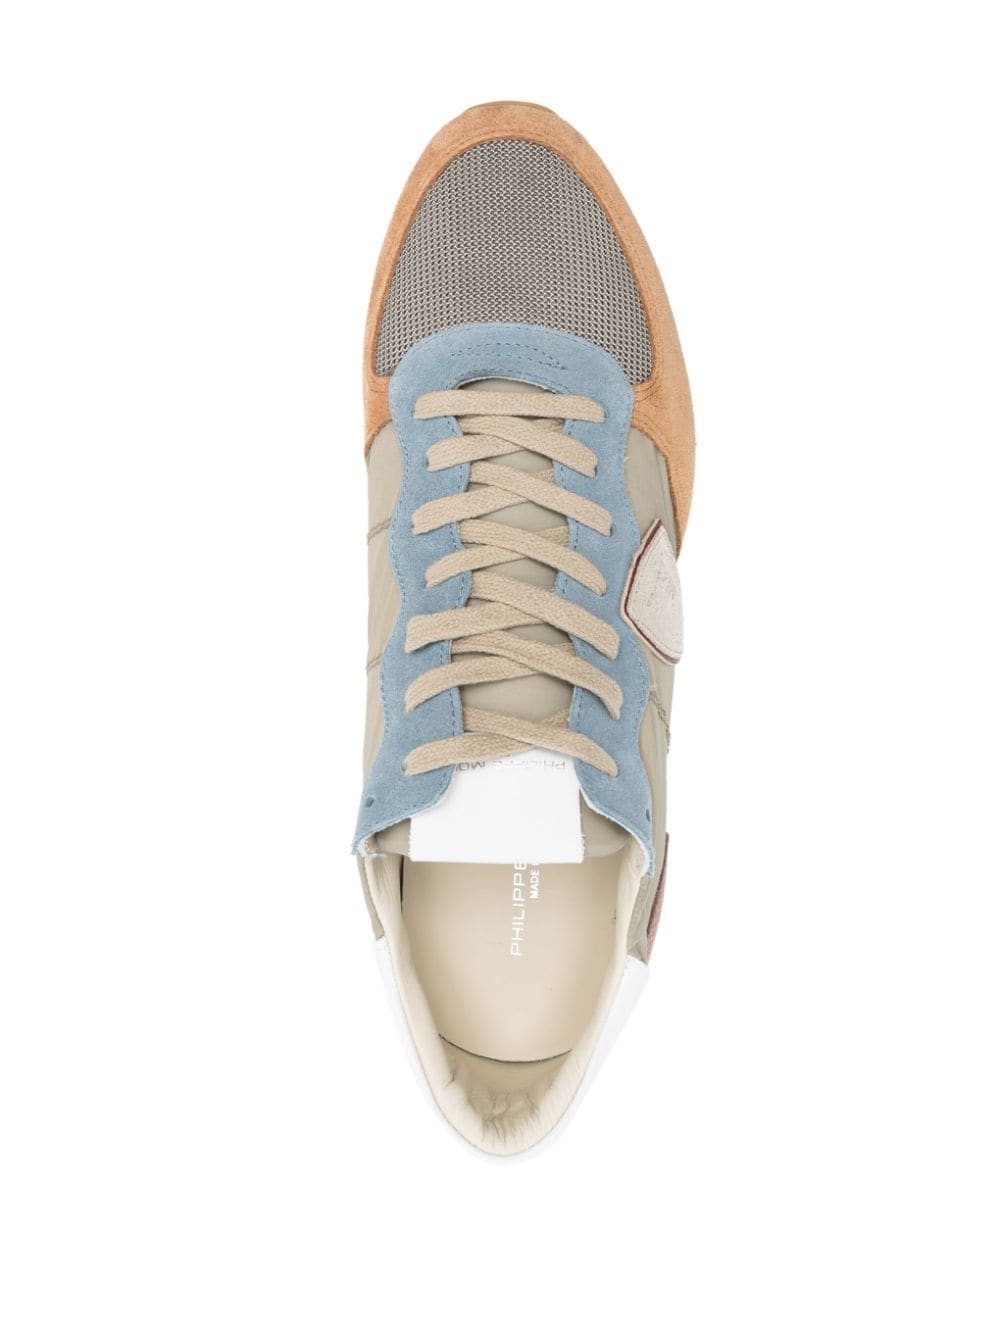 Philippe Model Paris logo-patch Panelled Sneakers - Farfetch